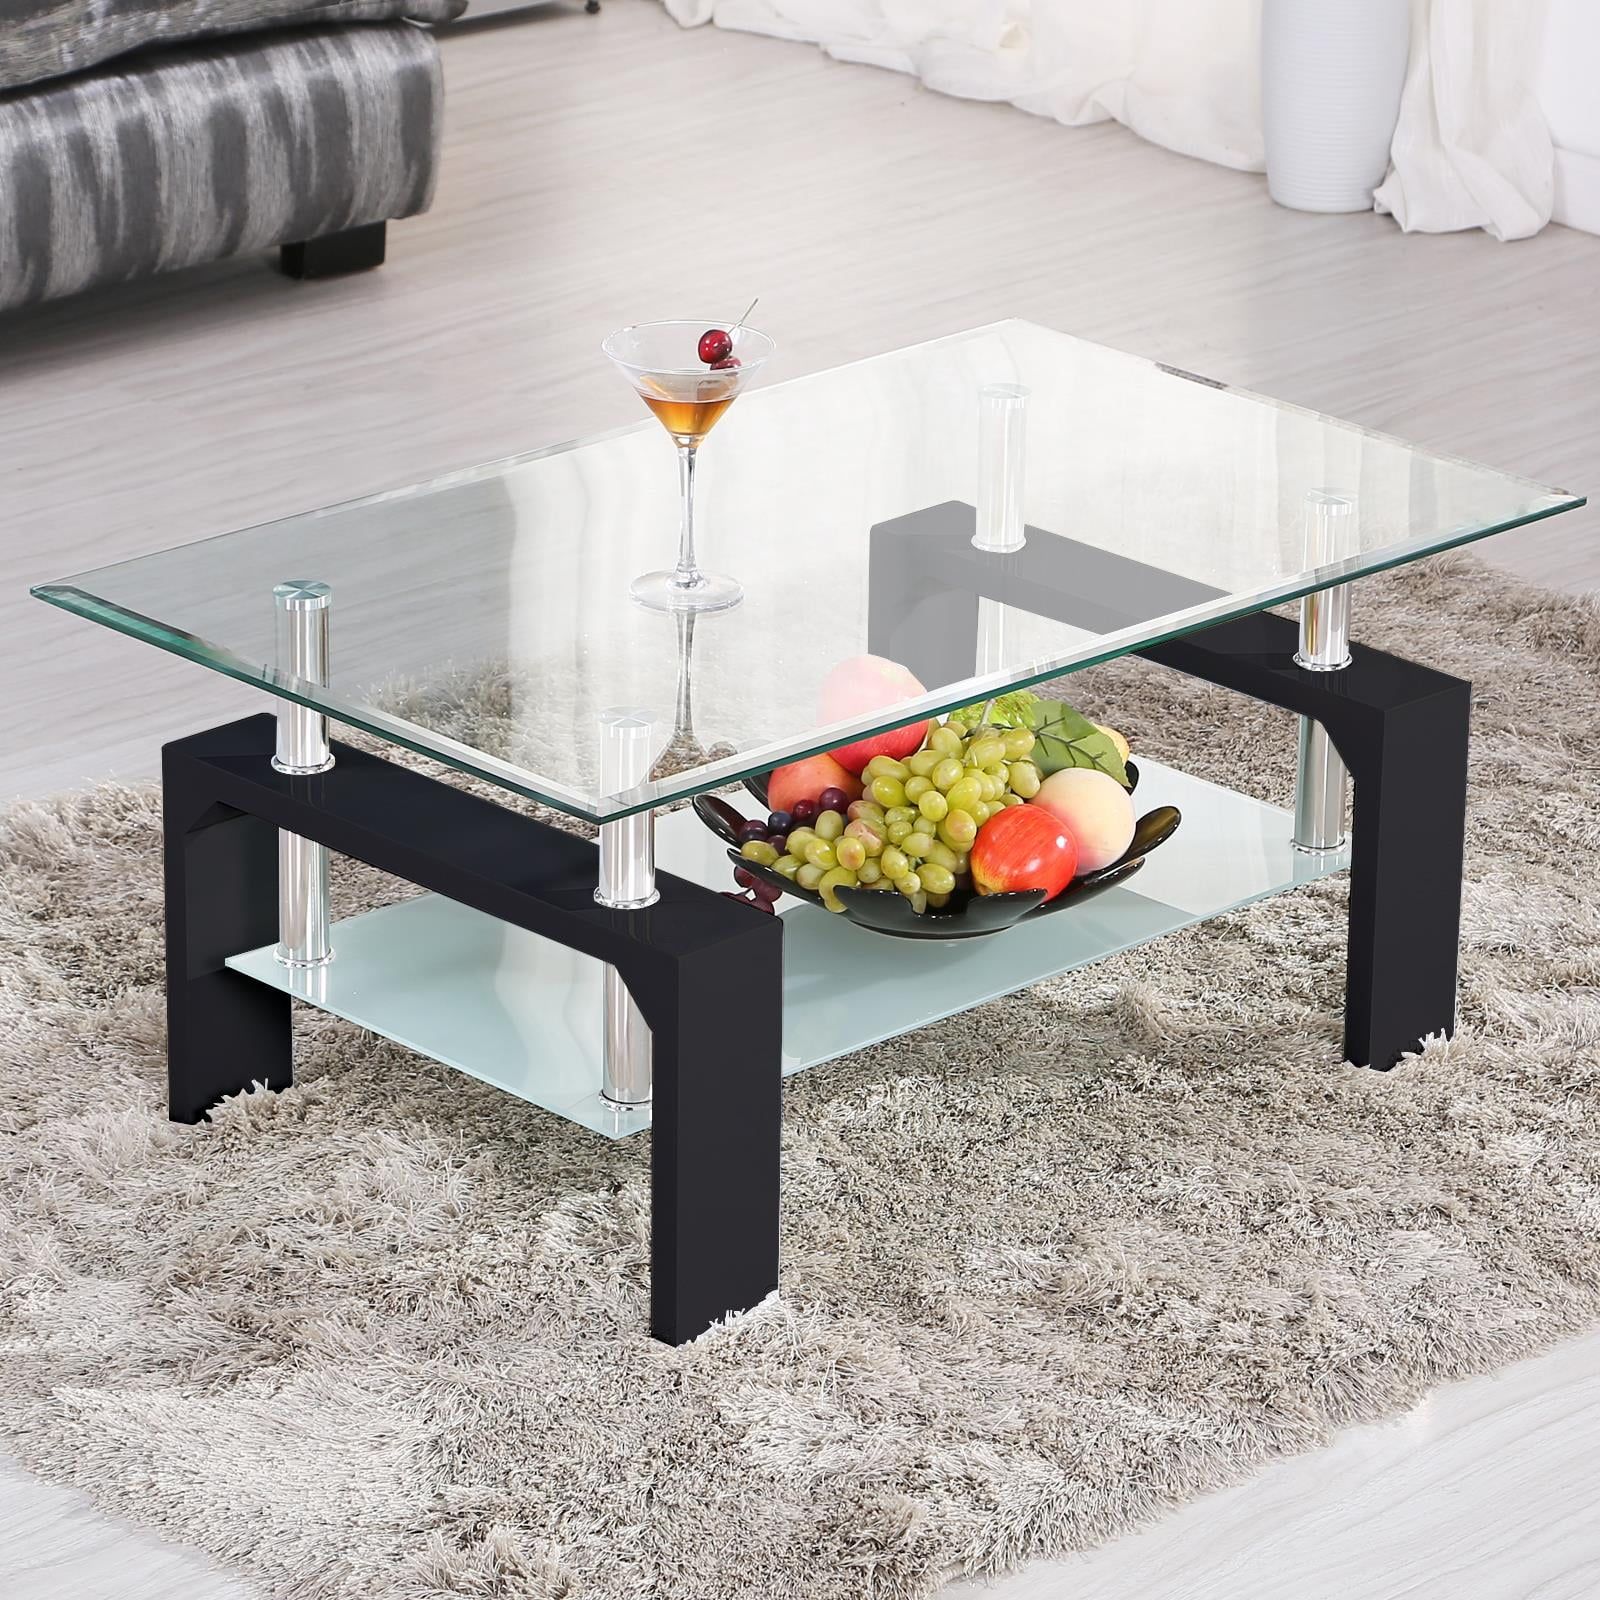 Ktaxon Rectangular Glass Coffee Table Shelf Wood Living Room Furniture Pertaining To Rectangular Coffee Tables With Pedestal Bases (View 13 of 20)